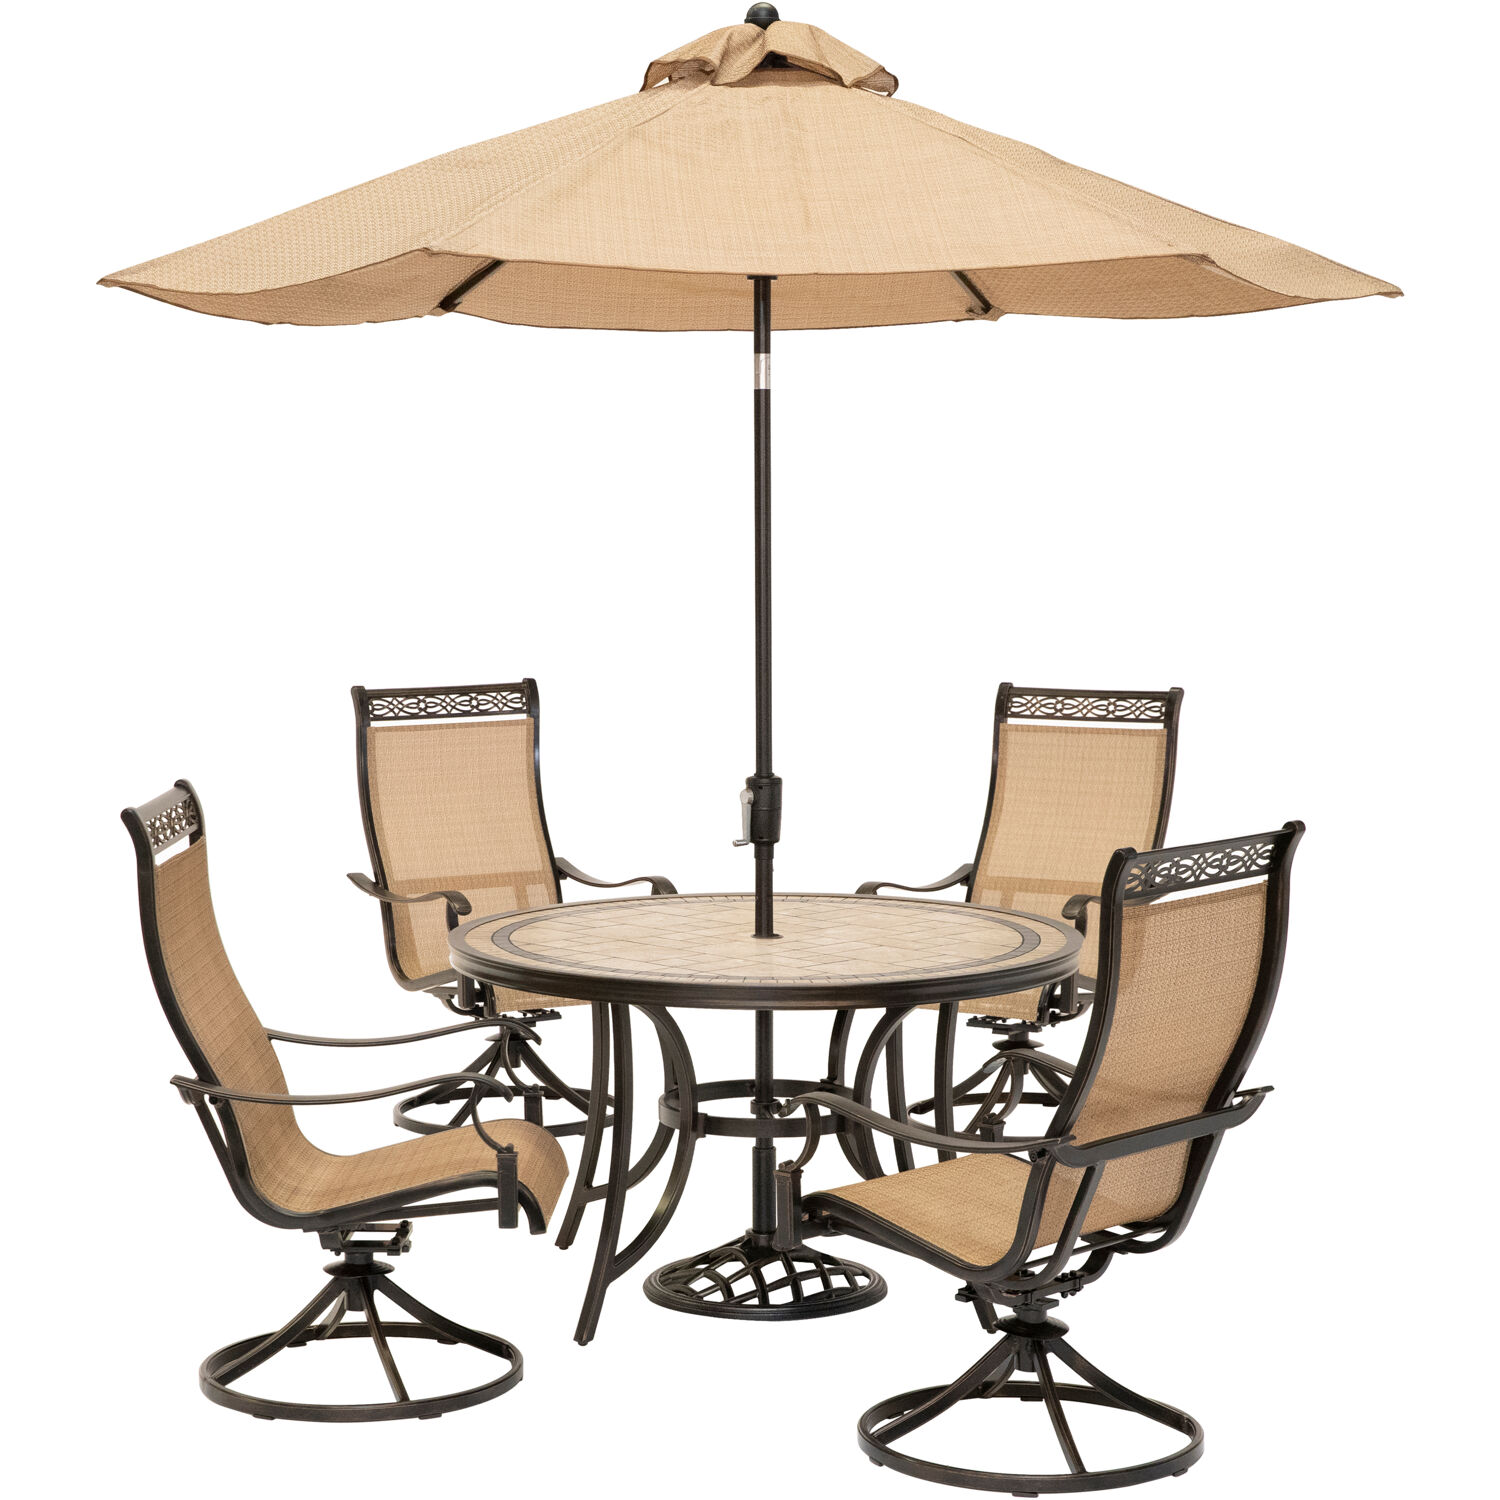 Hanover Monaco 5-Piece Outdoor Furniture Patio Dining Set, 4 Sling Swivel Rocker Chairs, 51" Round Tile-Top Table, Umbrella, and Base, Brushed Bronze - image 1 of 17